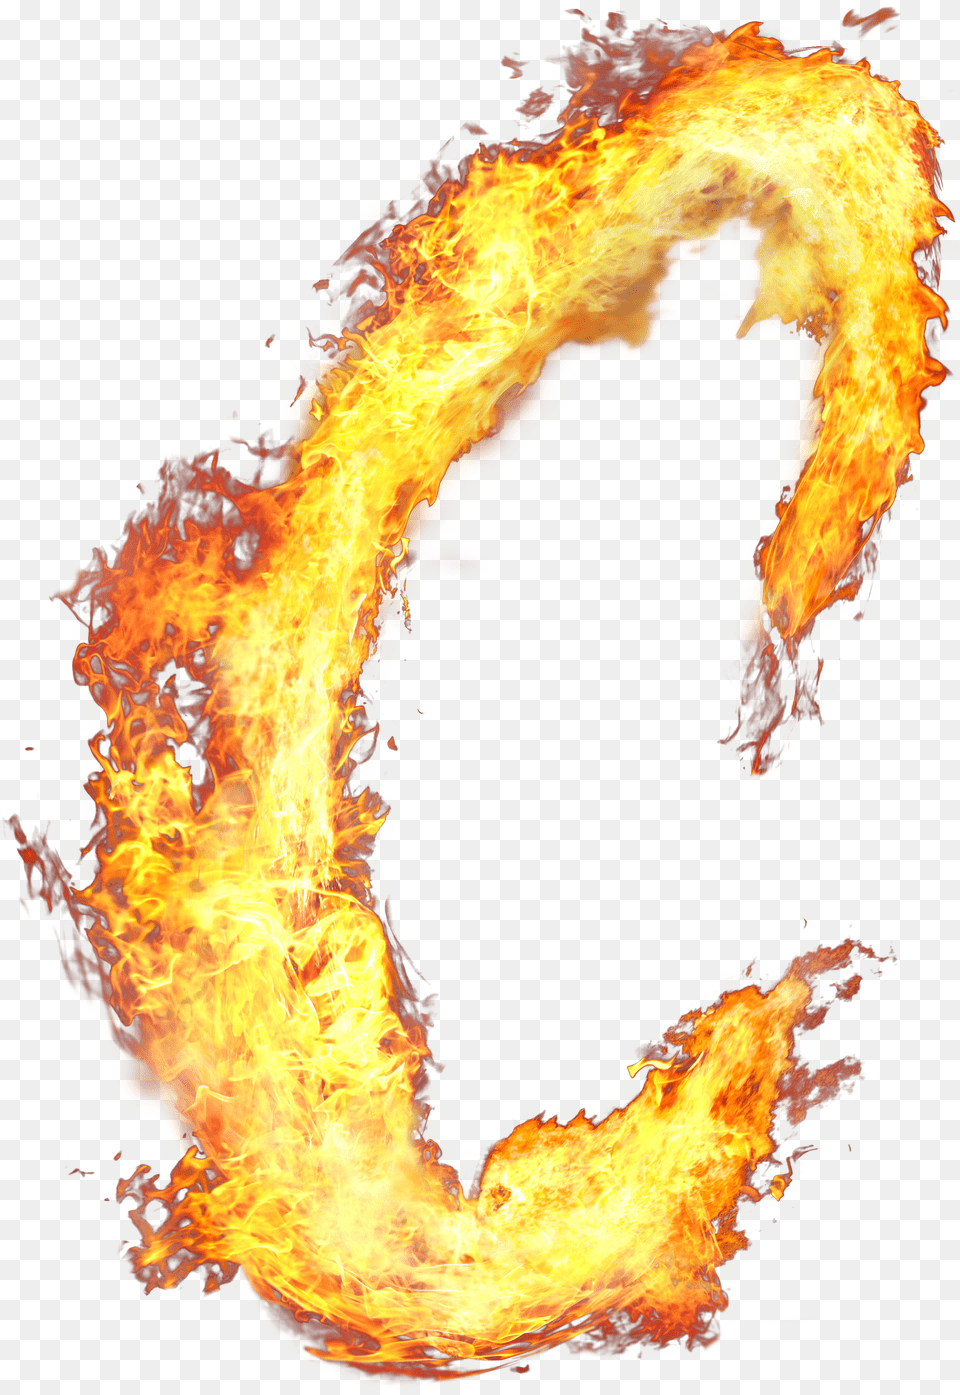 Fire Bomb Meteor And In The Shape Of Letter Fireball Transparent Free Png Download